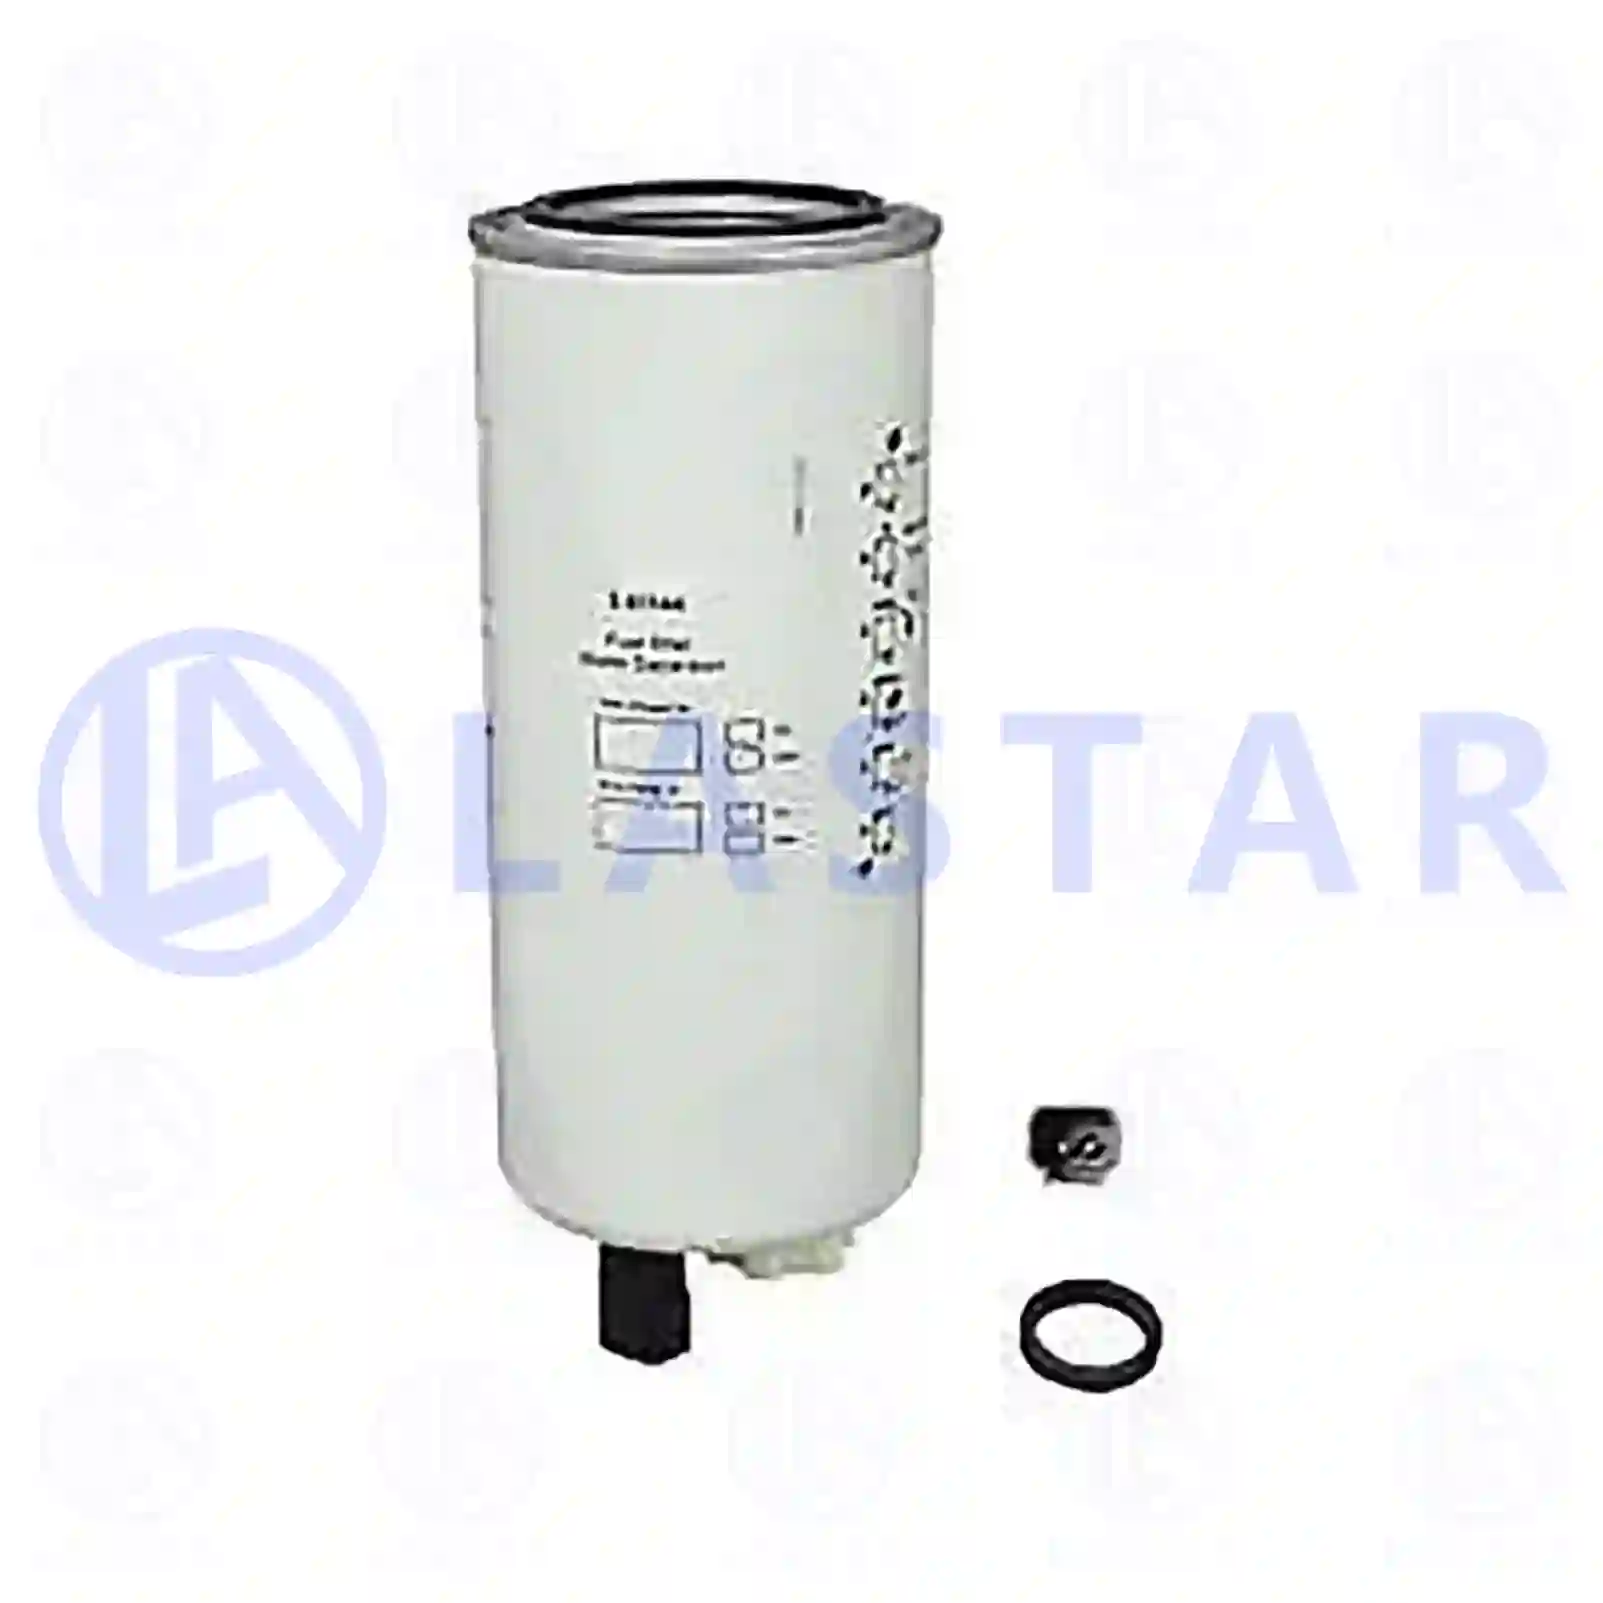 Fuel filter, water separator, 77724167, 1814637, ZG10165-0008 ||  77724167 Lastar Spare Part | Truck Spare Parts, Auotomotive Spare Parts Fuel filter, water separator, 77724167, 1814637, ZG10165-0008 ||  77724167 Lastar Spare Part | Truck Spare Parts, Auotomotive Spare Parts